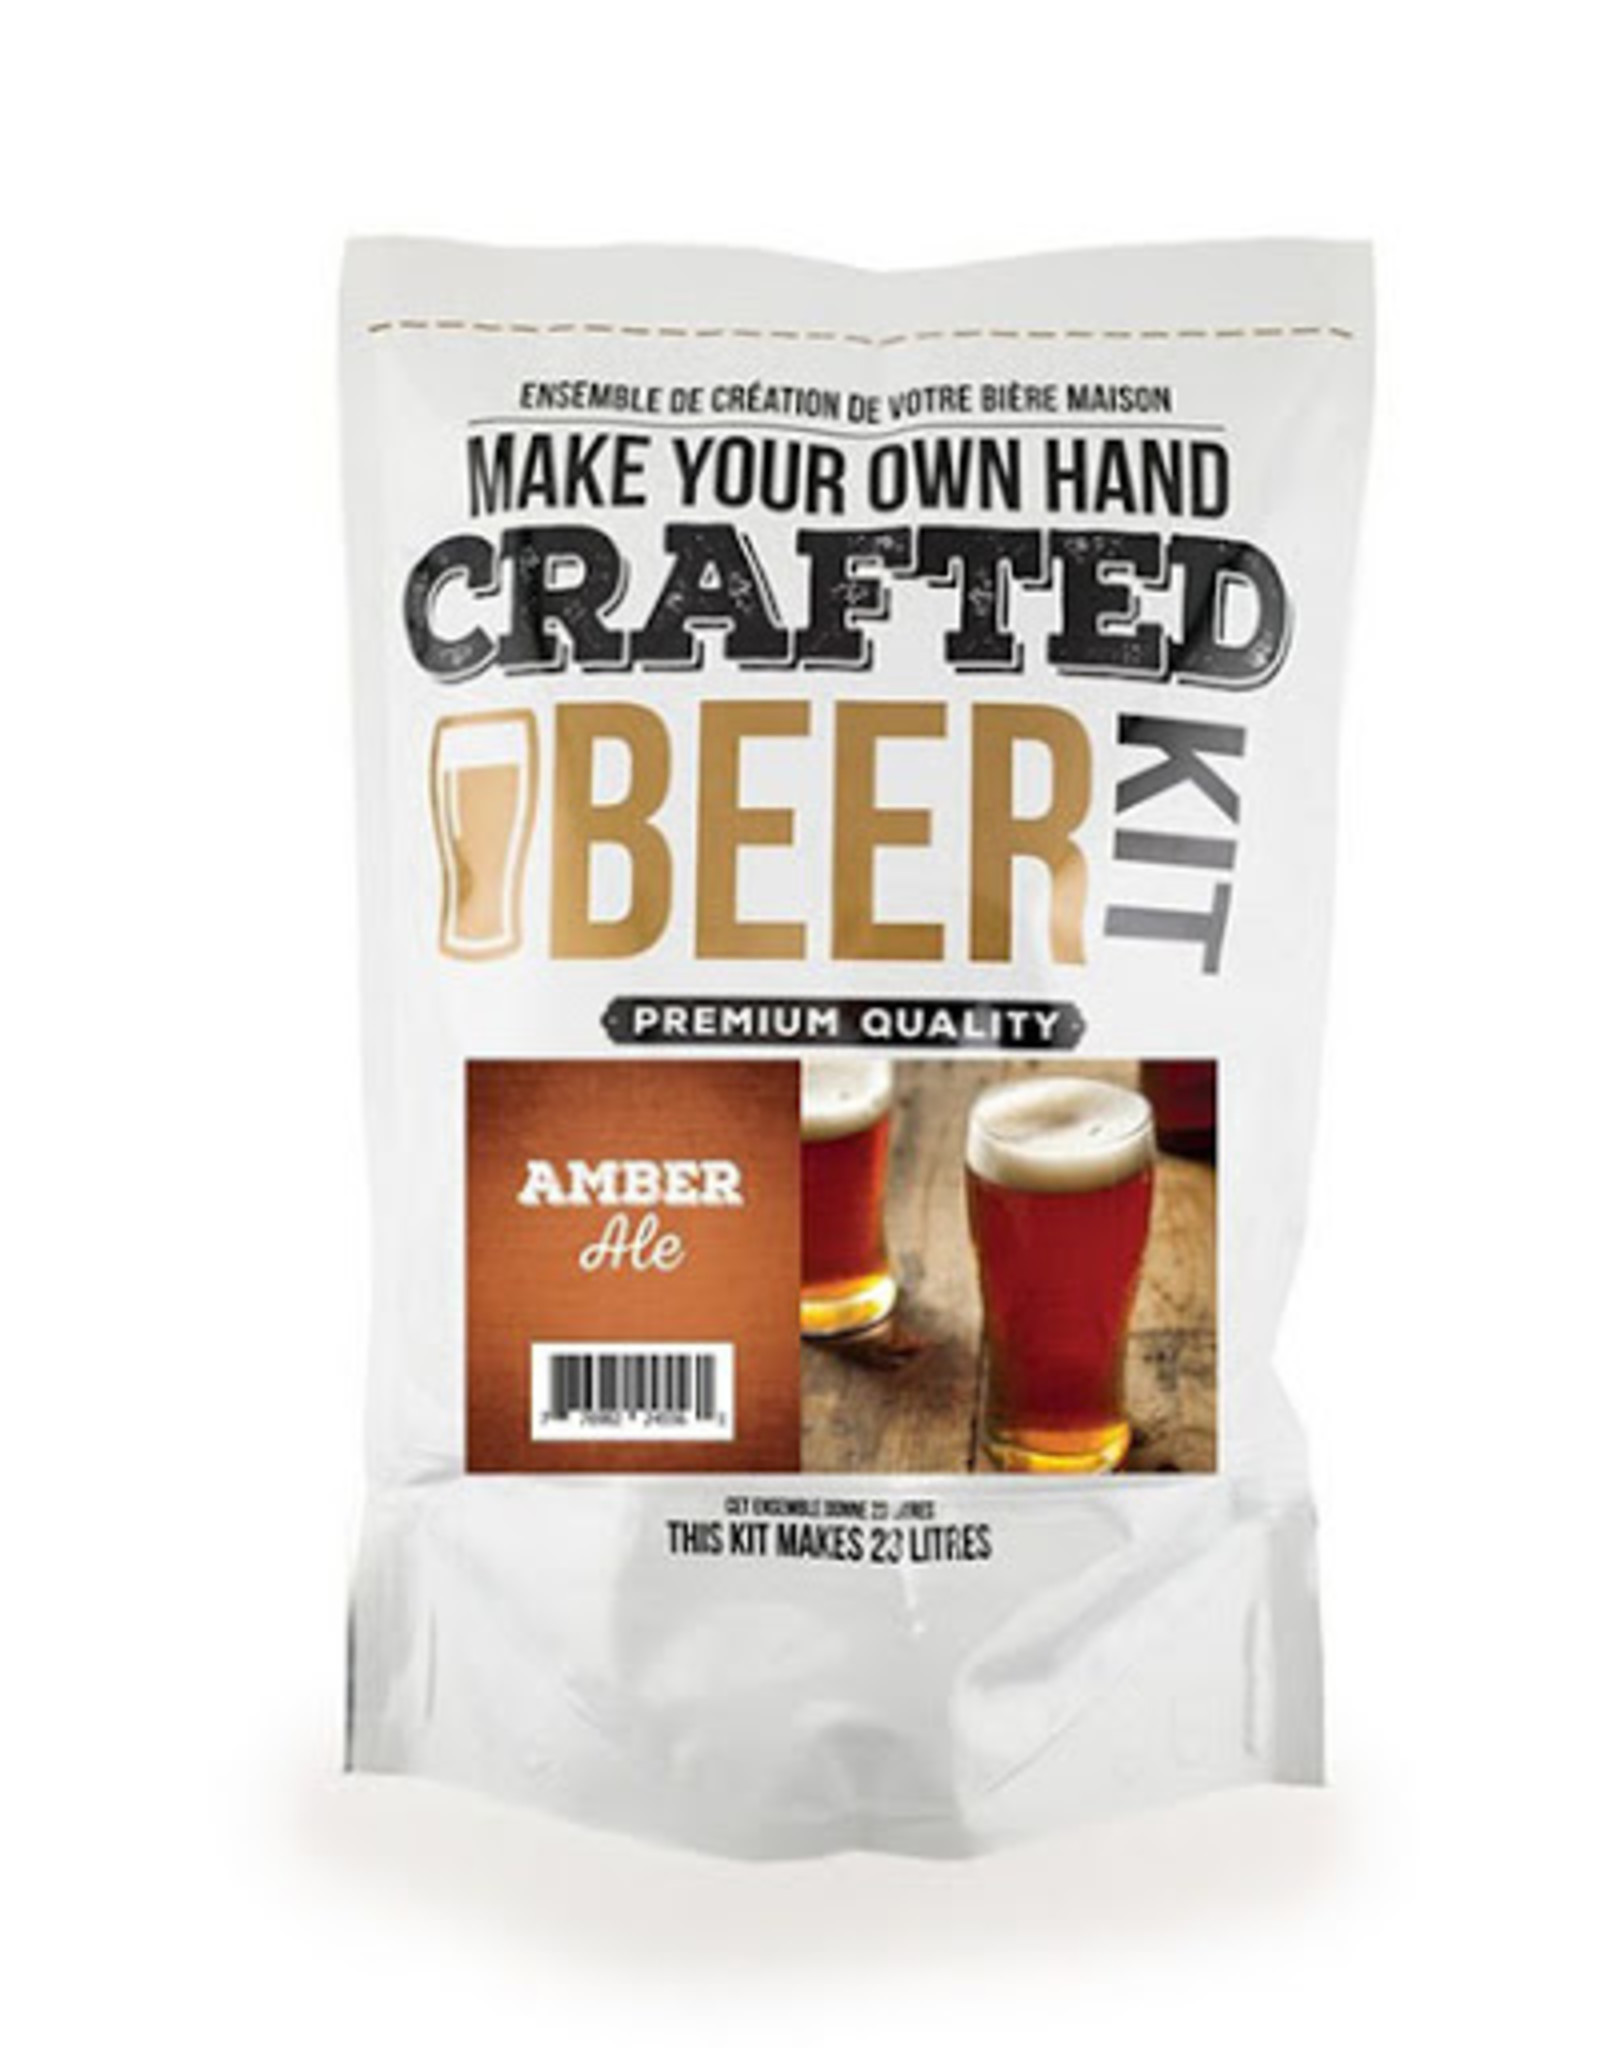 Crafted beer kit - Amber Ale